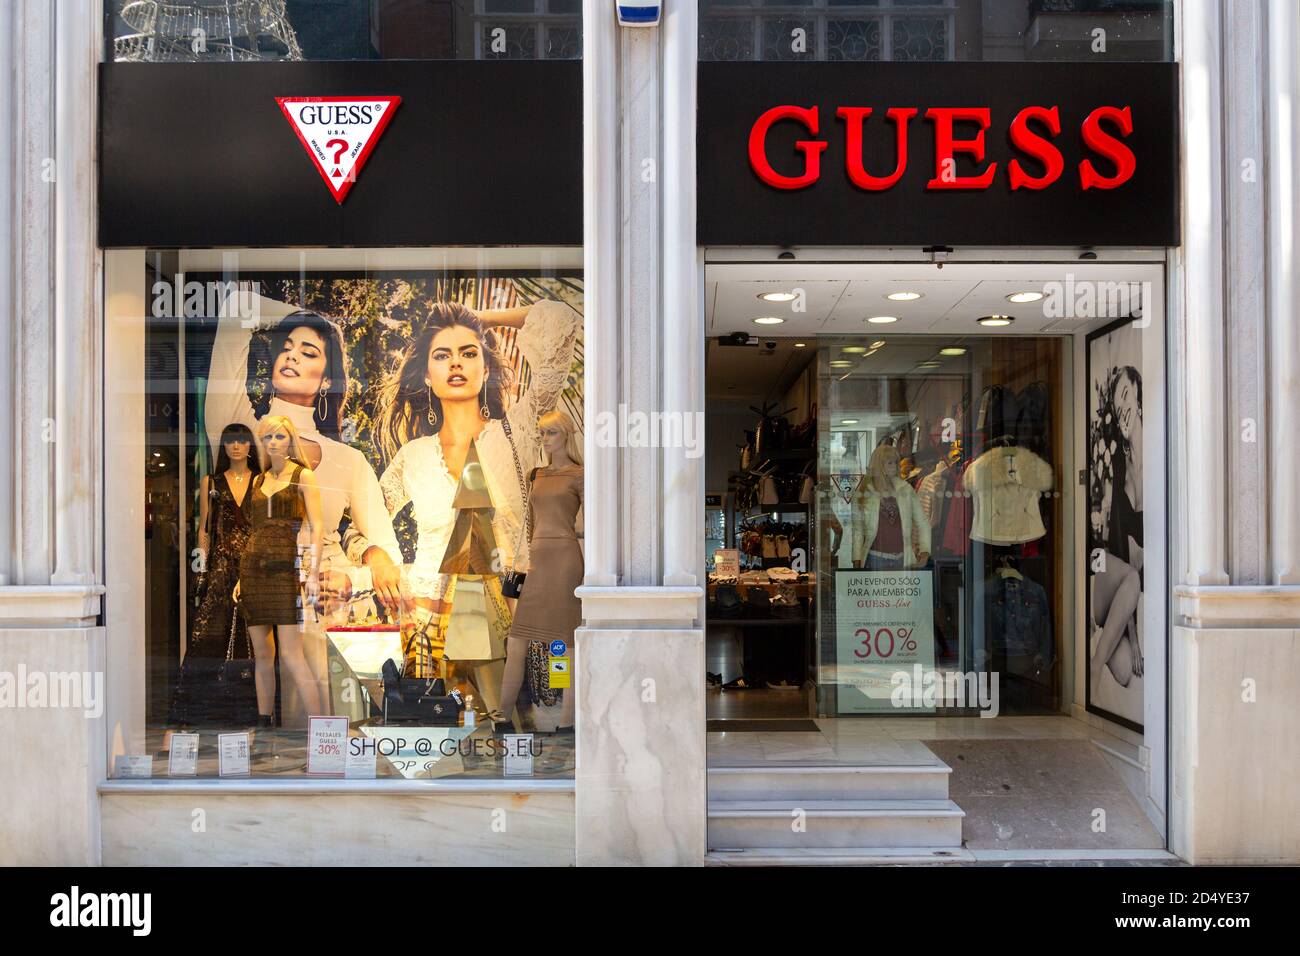 Guess display window. Guess fashion brand clothing store Stock Photo - Alamy